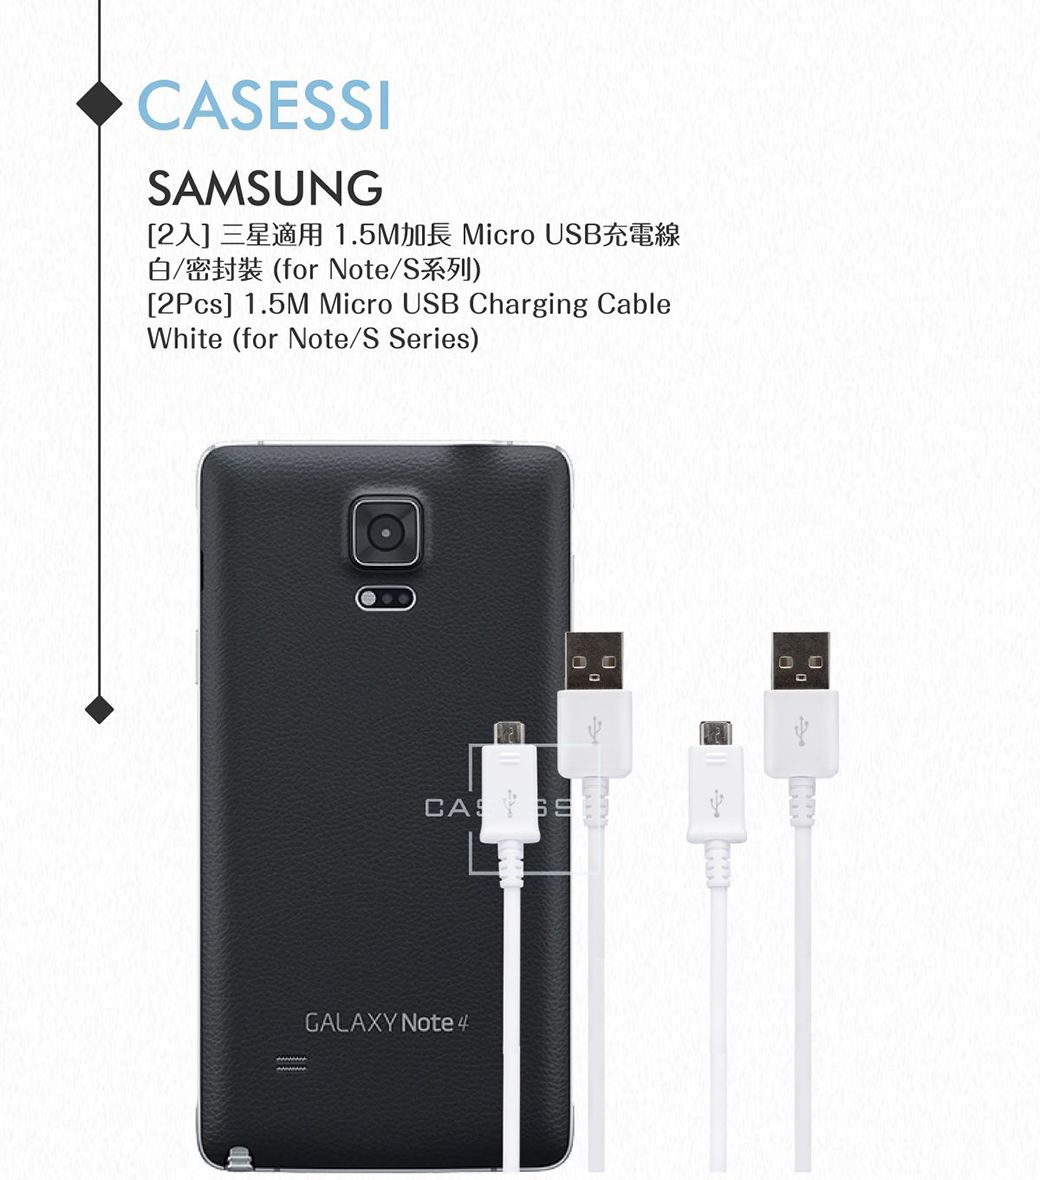 CAESSISAMSUNG2J]TPA 1.5M[ Micro USBRqu/K(for Note/StC)[2Pcs] 1.5M Micro USB Charging CableWhite (for Note/S Series)GALAXY Note 4